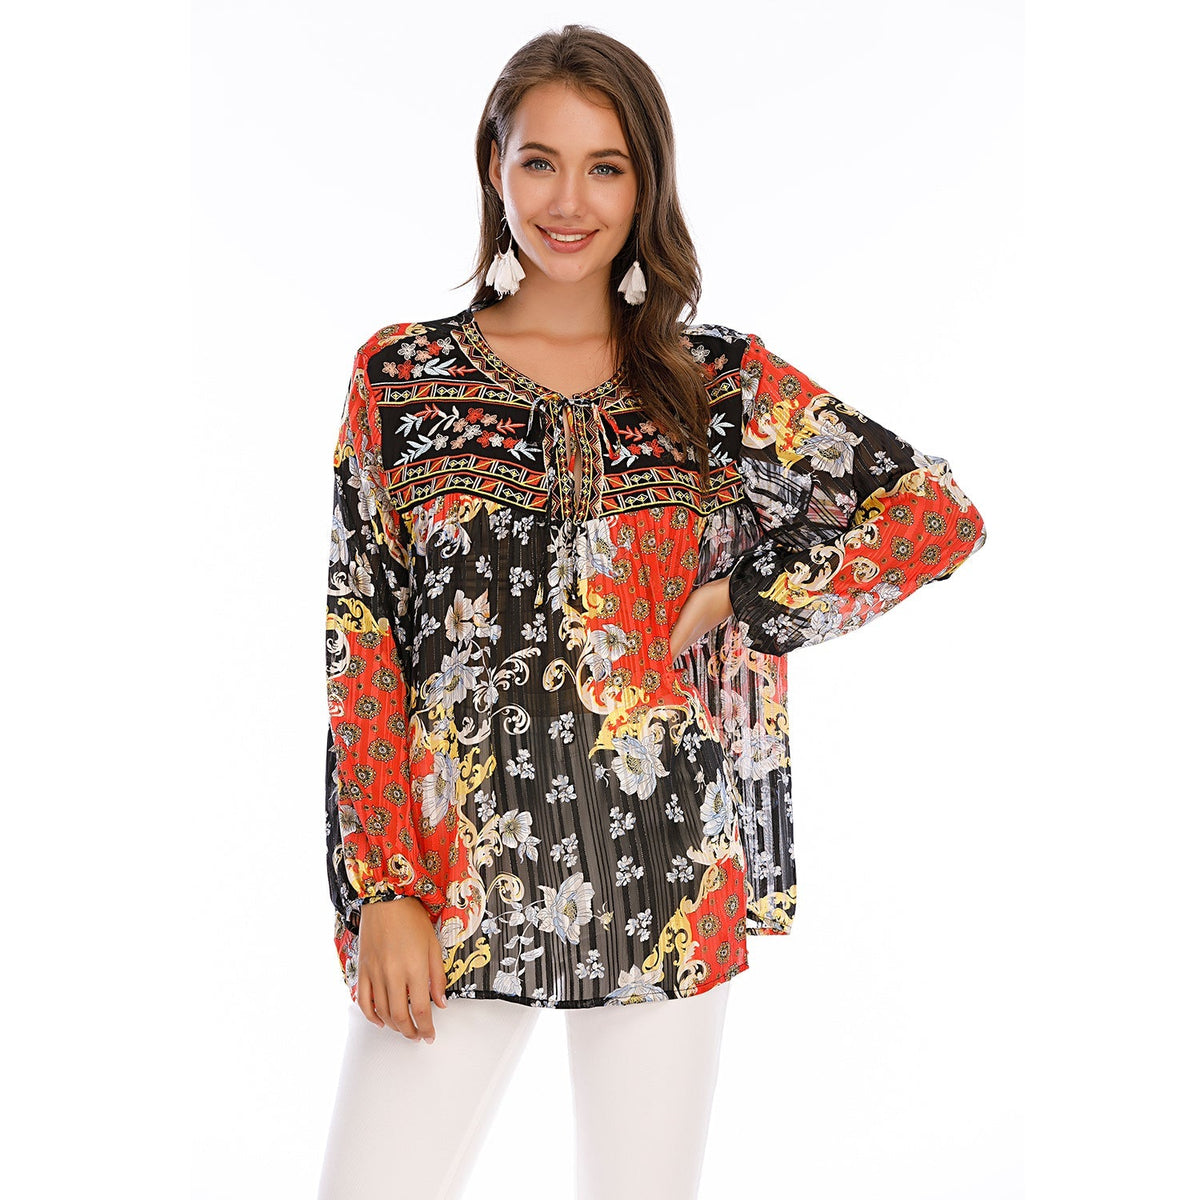 Women's Embroidered Printed Ethnic Style Loose Casual Chiffon Shirt Top Sai Feel